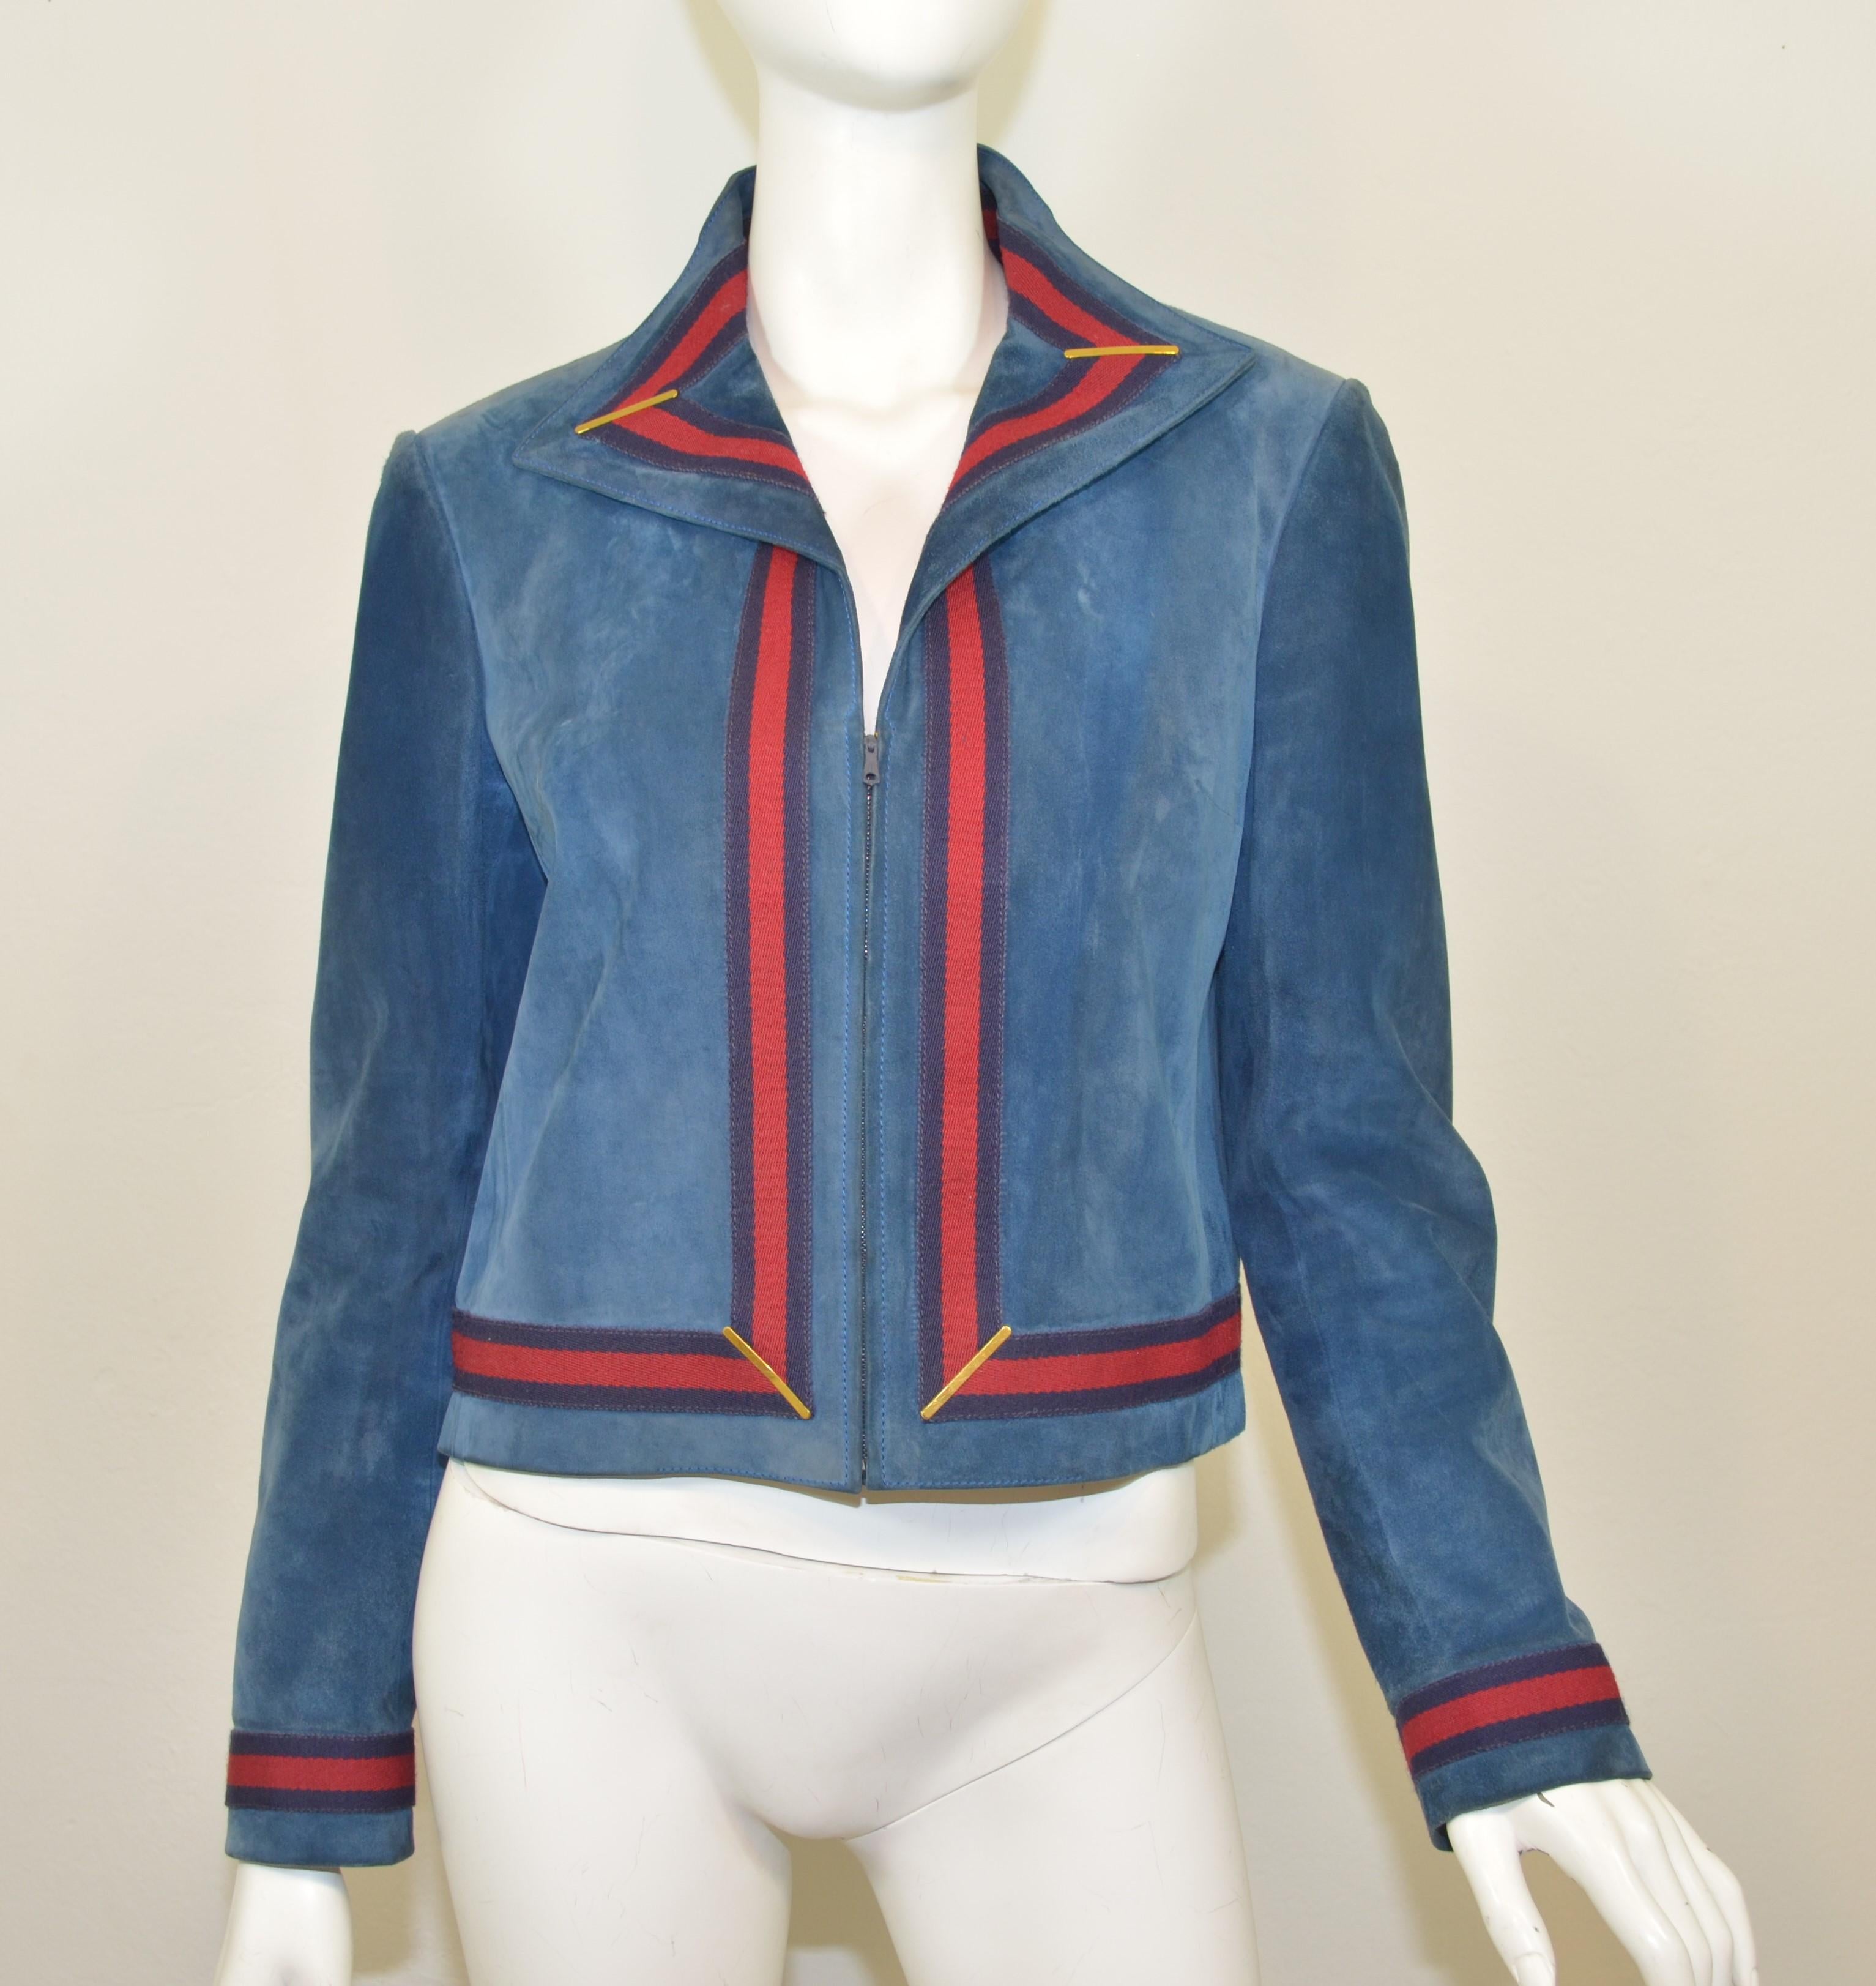 Vintage Gucci jacket is featured in a blue suede leather with the signature red/blue web trimming. Jacket has a zippered front and is fully lined, labeled size 48. Jacket is in great vintage condition with normal wears. See photos